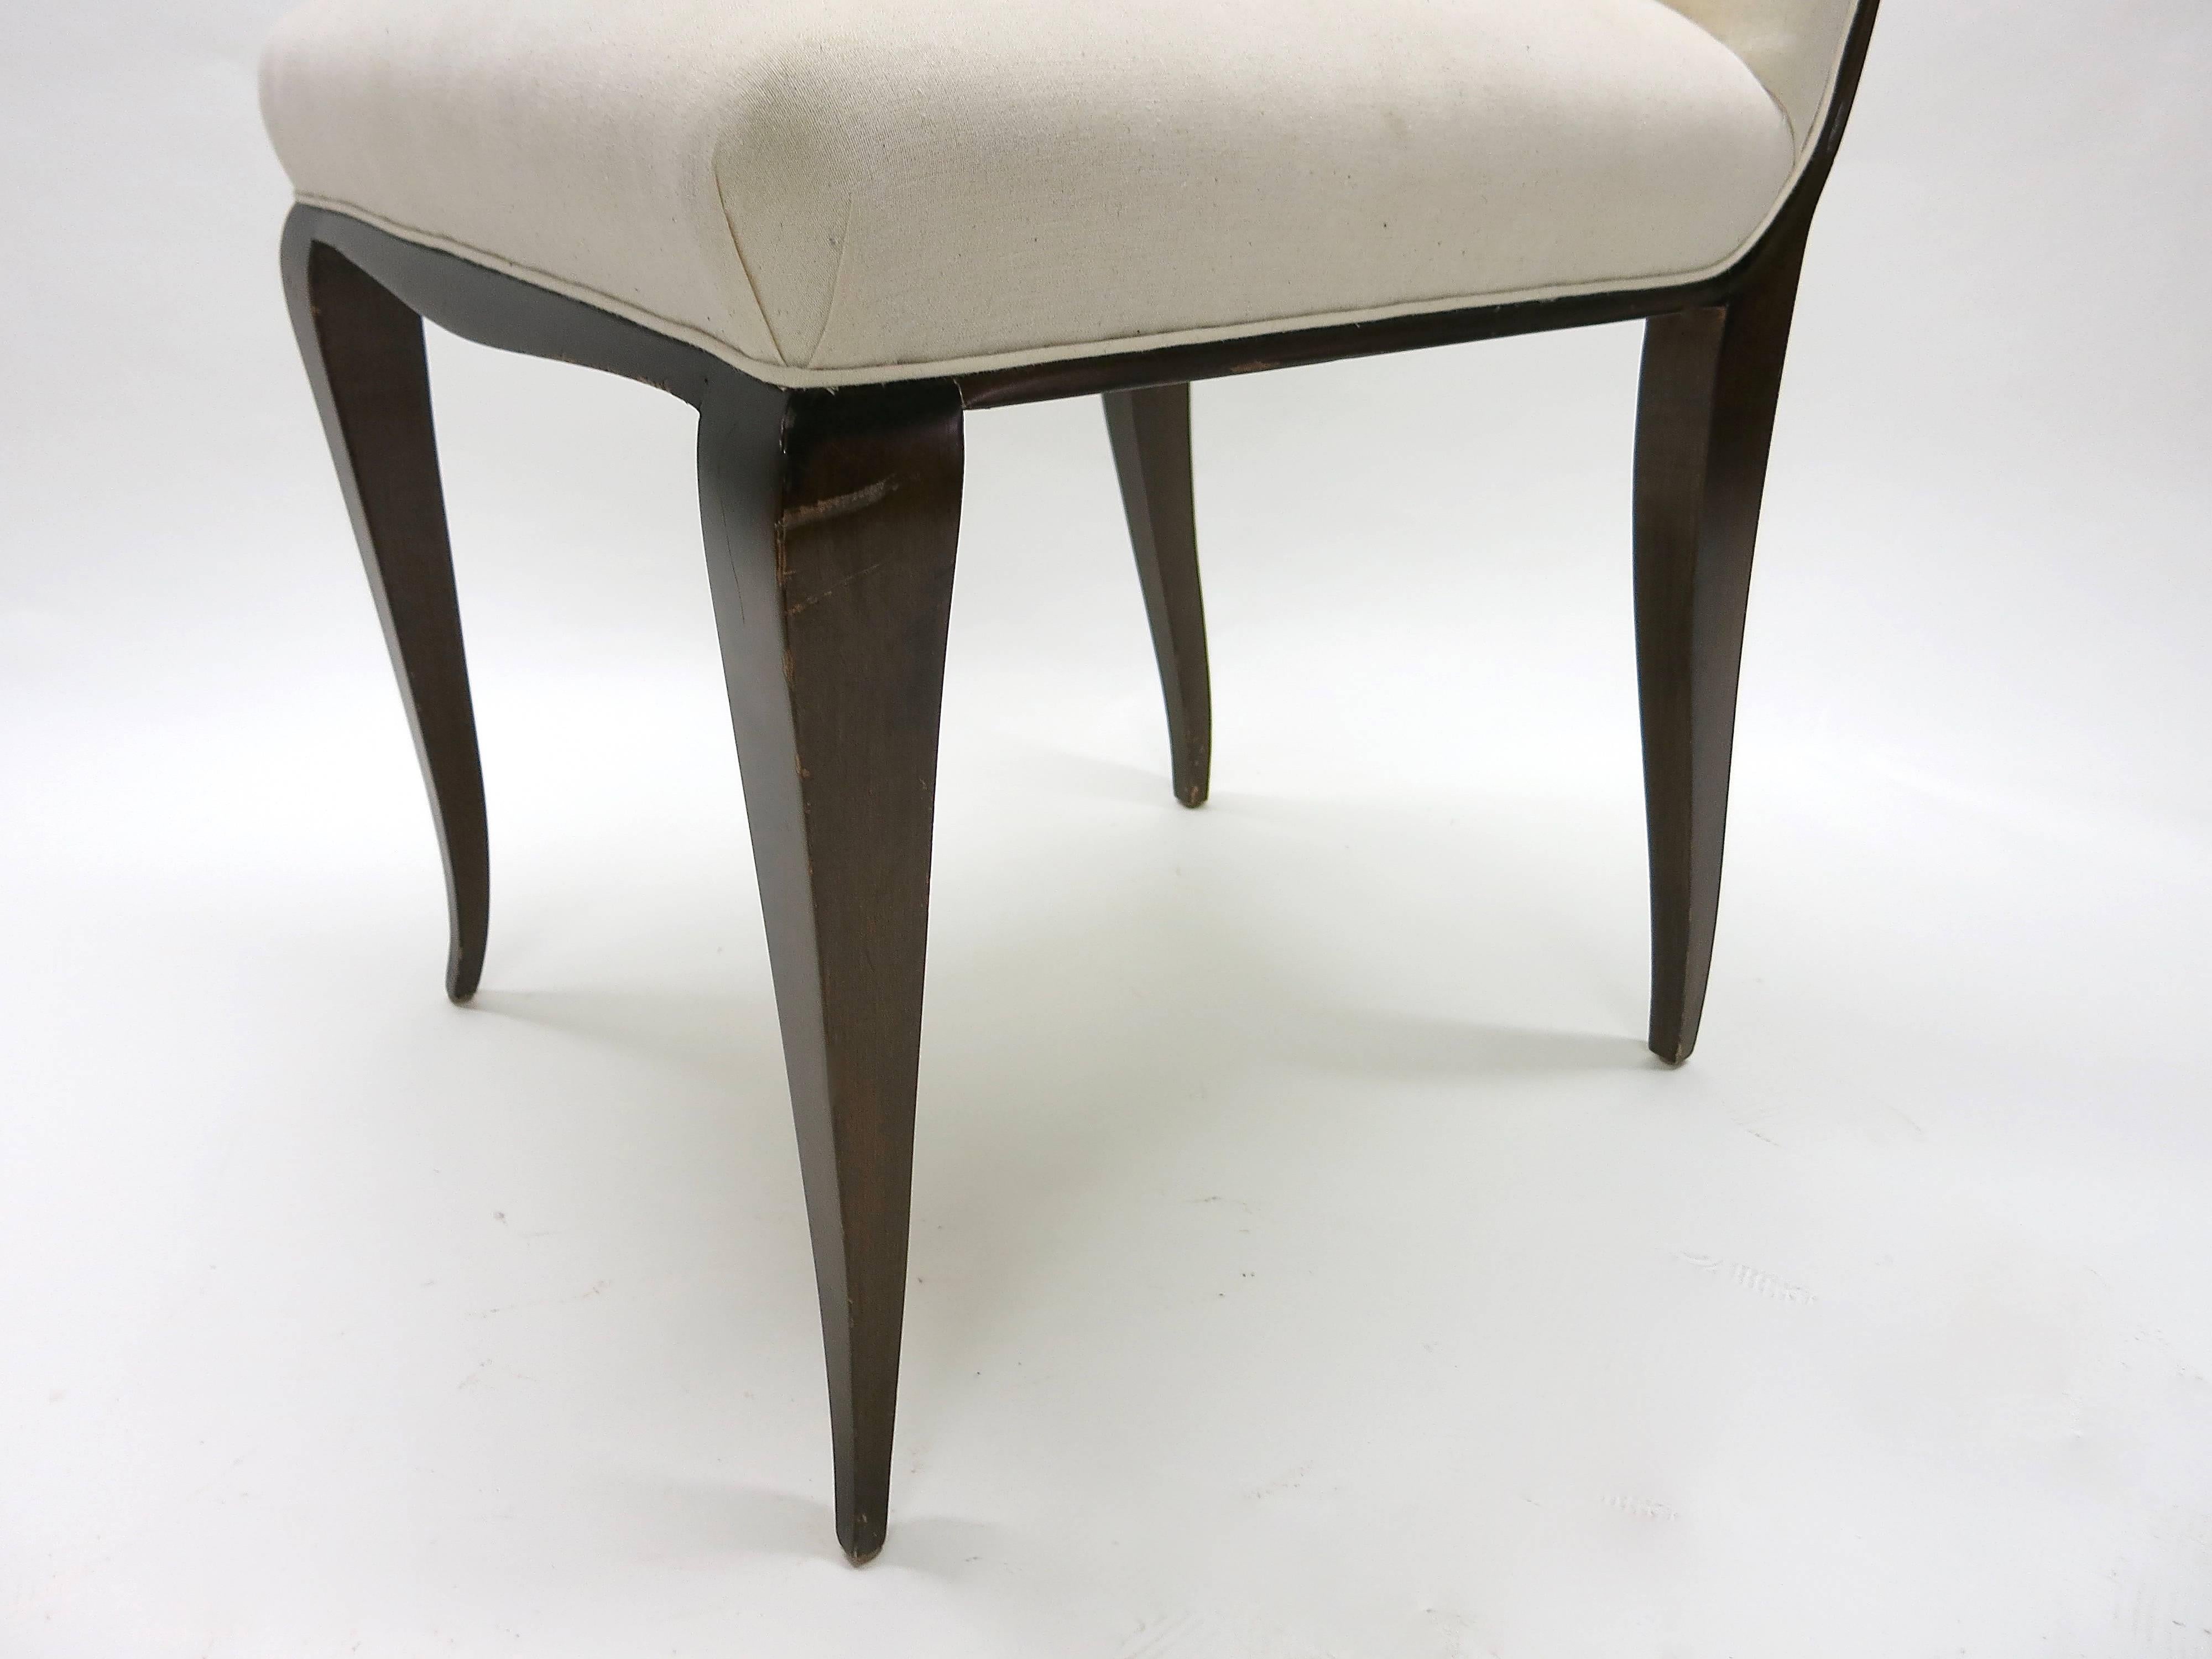 French Vanity Stool Original Design by Émile-Jacques Ruhlmann in 1927, France